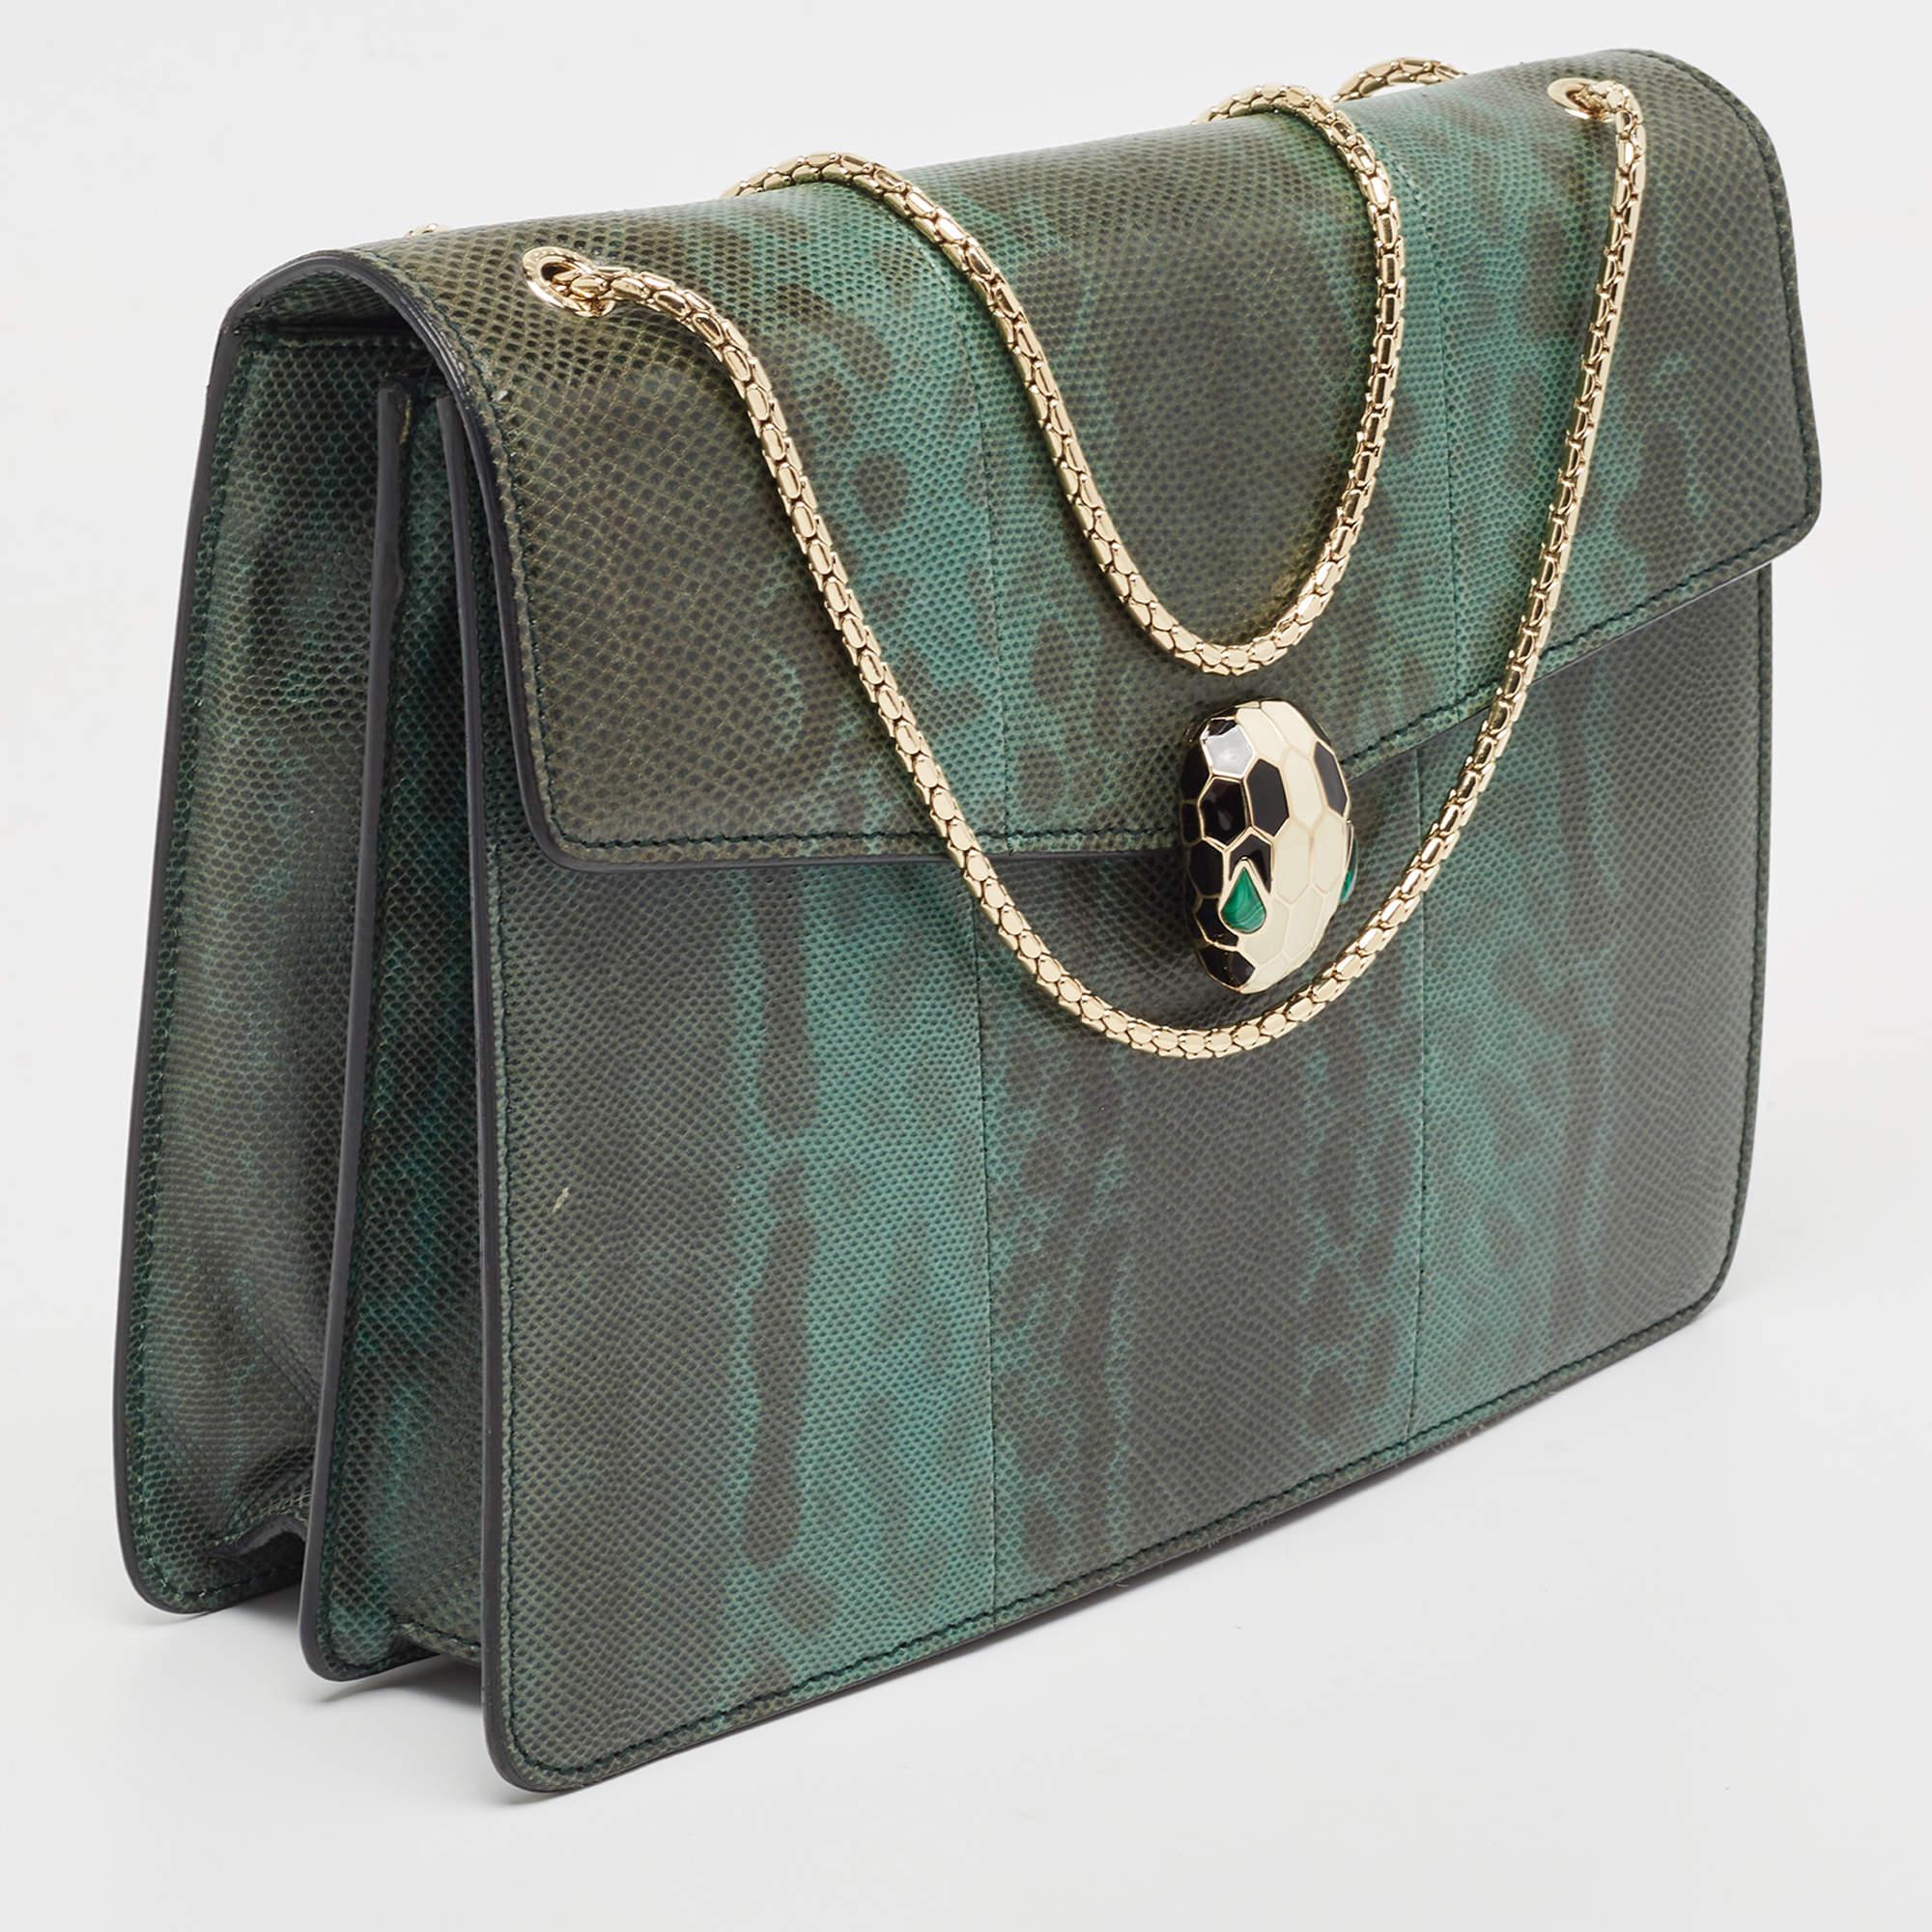 Bvlgari Green Karung Leather Large Serpenti Forever Shoulder Bag In Good Condition For Sale In Dubai, Al Qouz 2